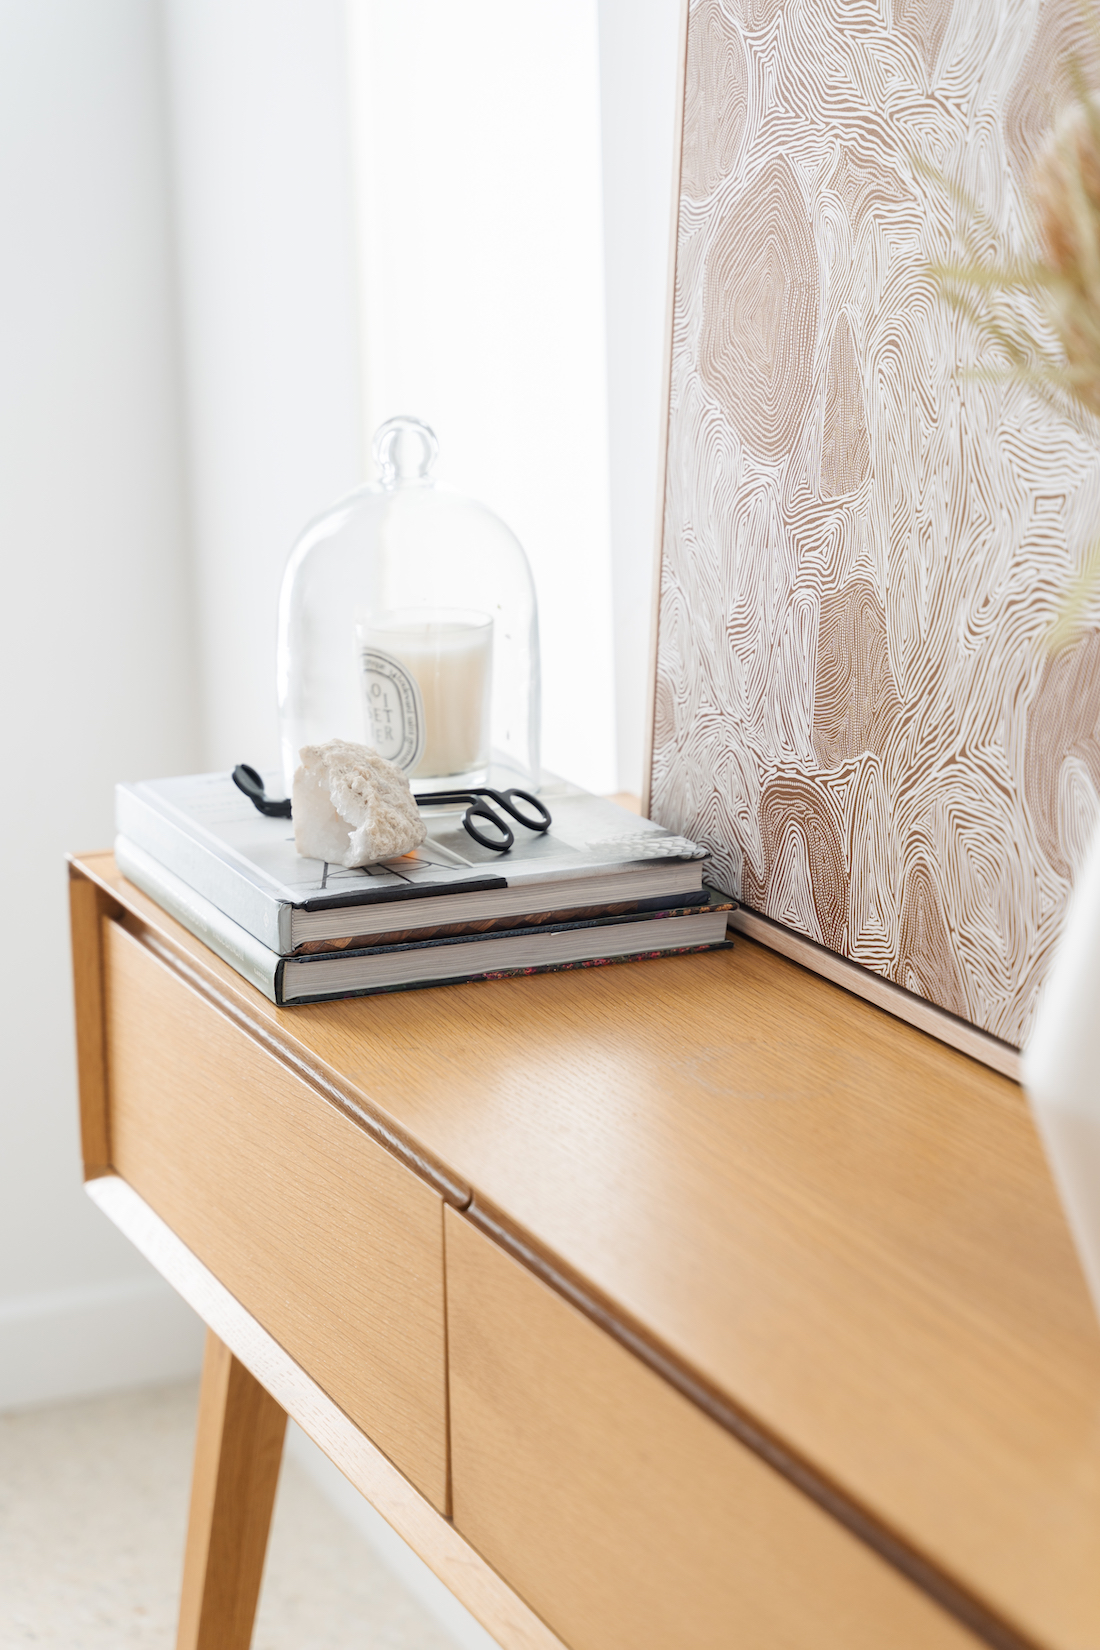 Styled vignette on console table